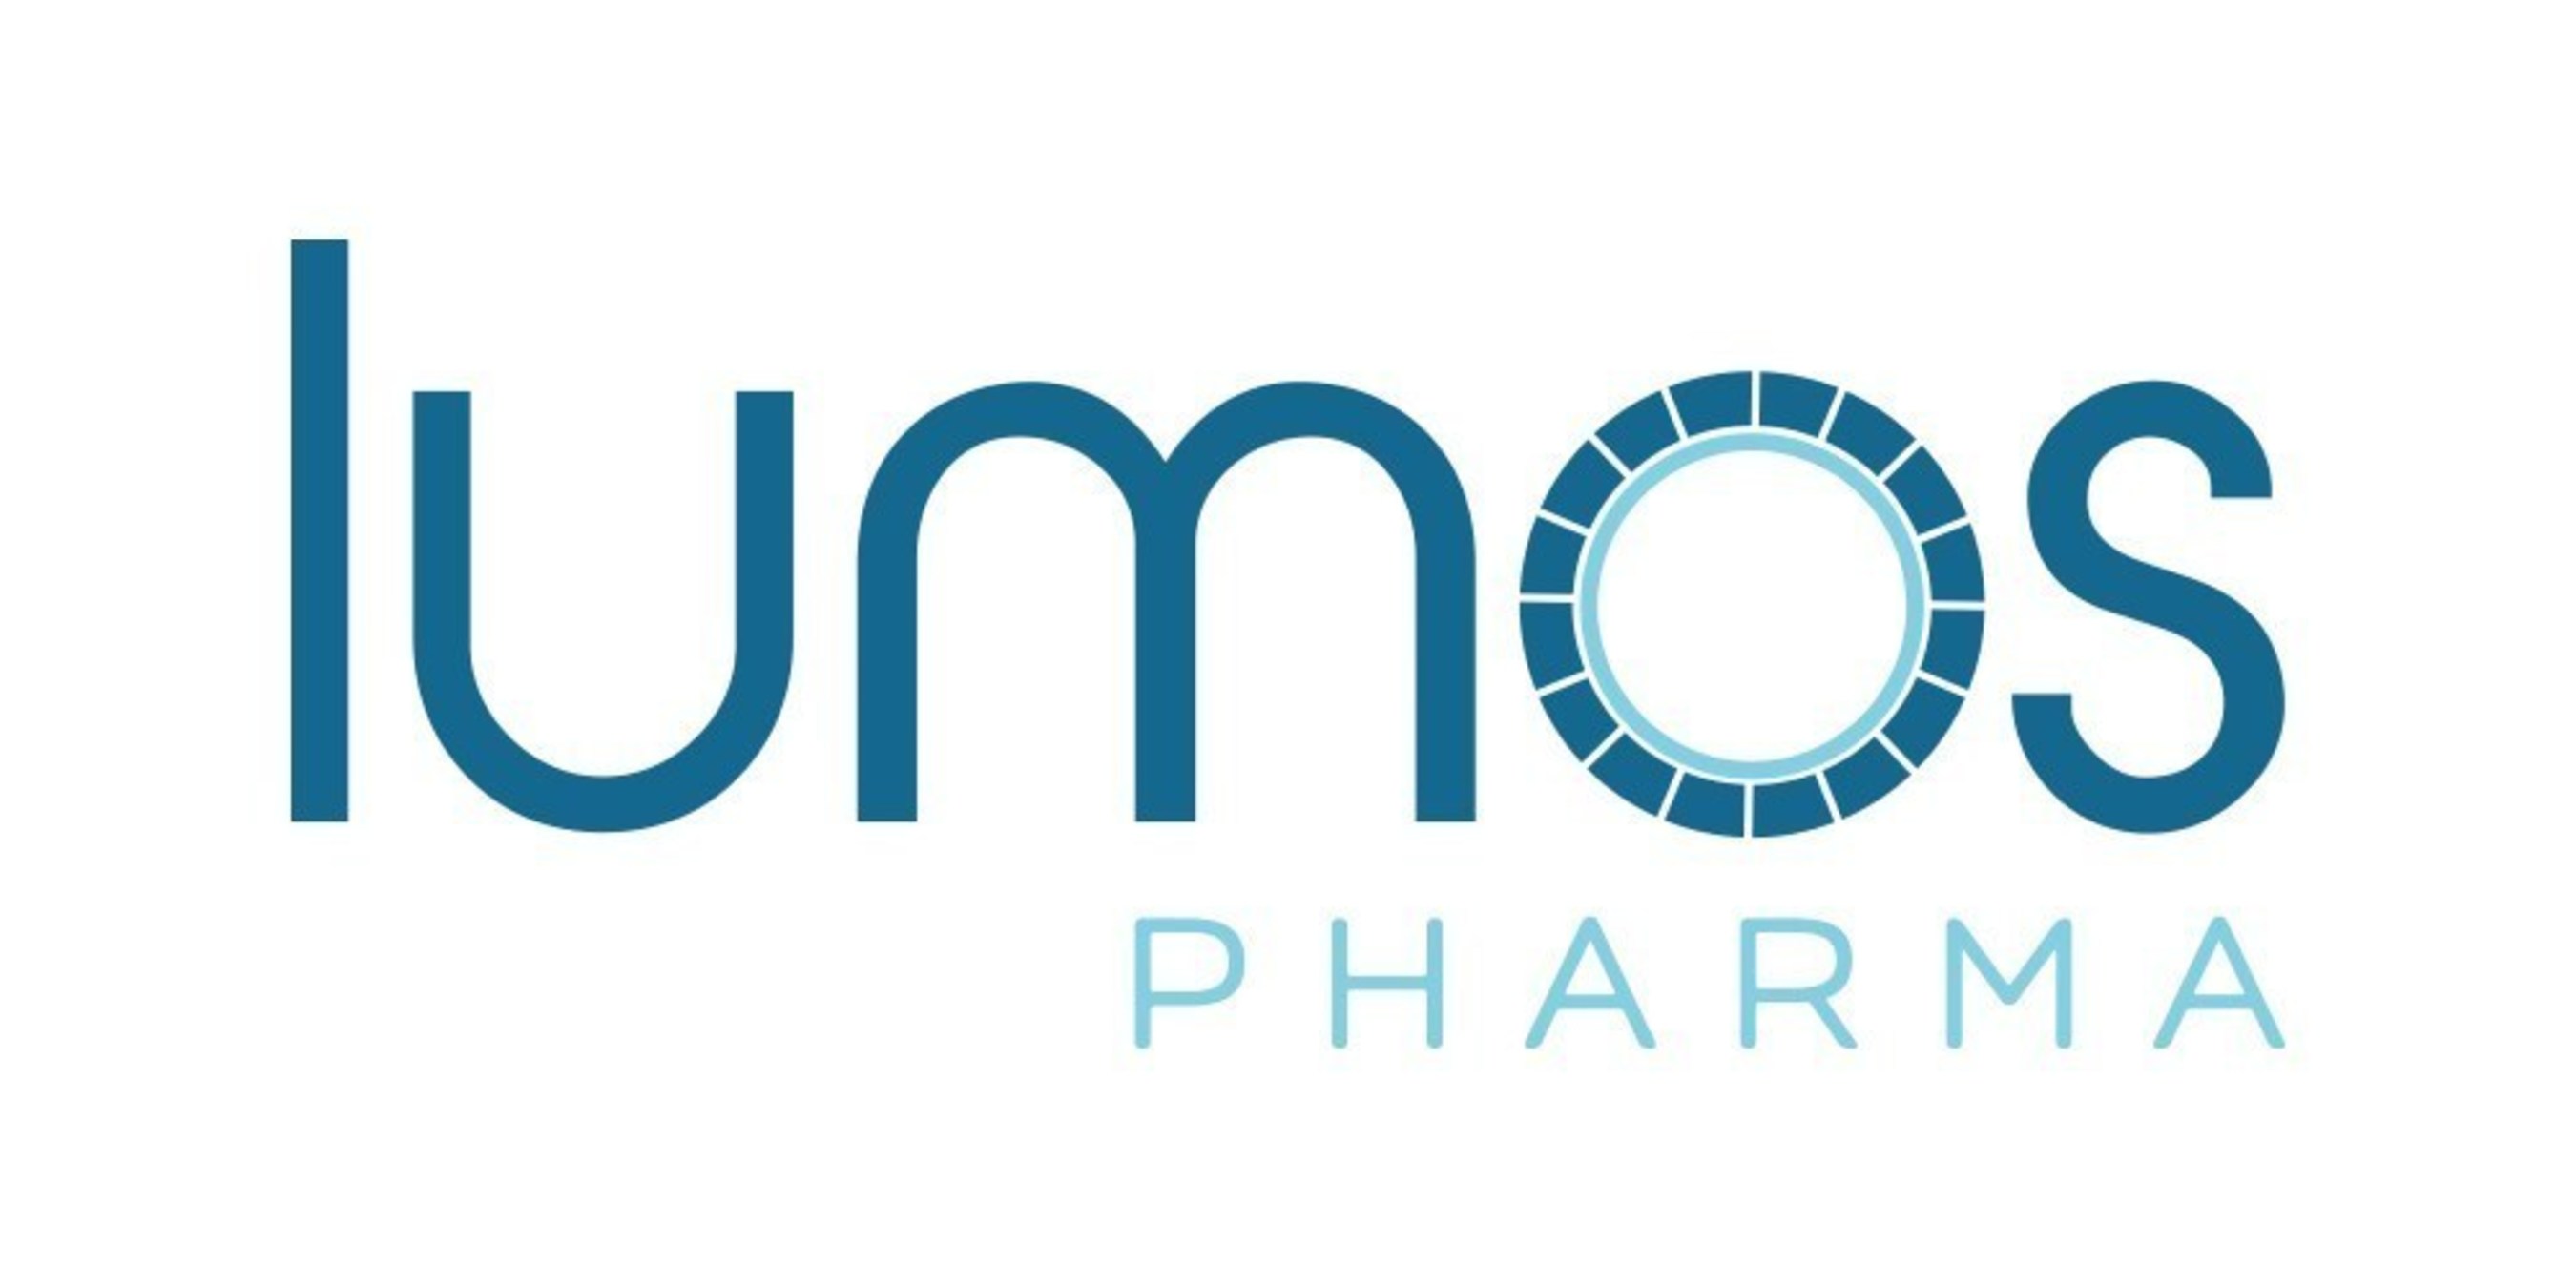 Lumos Pharma is focused on bringing novel therapies to patients afflicted with unmet medical needs in severe, rare, and genetic diseases. Lumos Pharma is led by an experienced management team with longstanding experience in the rare disease space. Lumos Pharma's lead compound is supported by the National Institutes of Health's Therapeutics for Rare and Neglected Diseases (TRND) program.